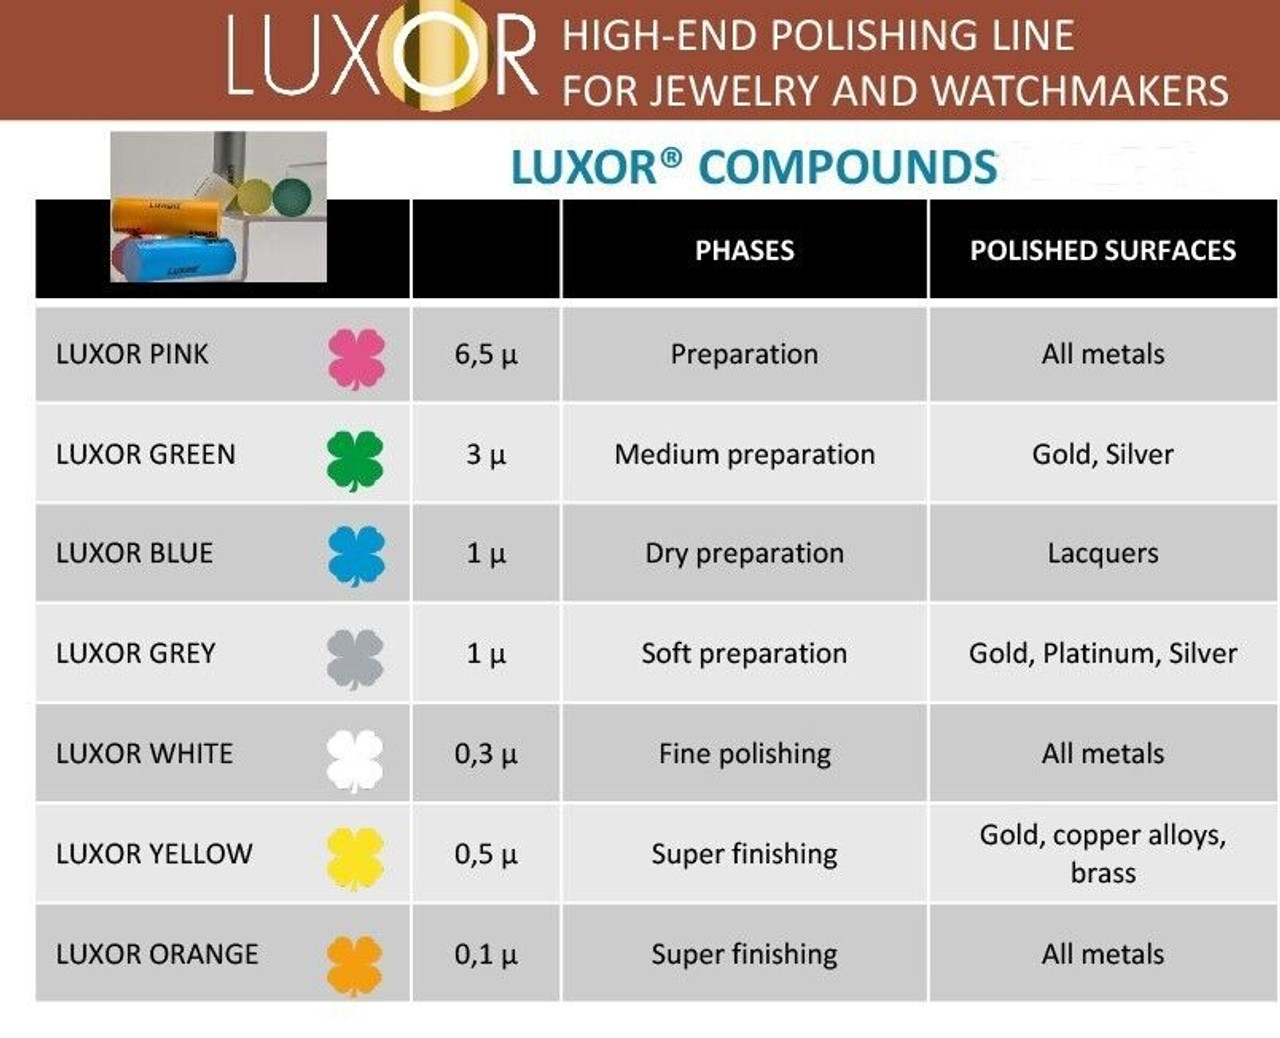 Luxor Merard Preparation Polishing Compound Pink /Red for All Metals Gold Silver